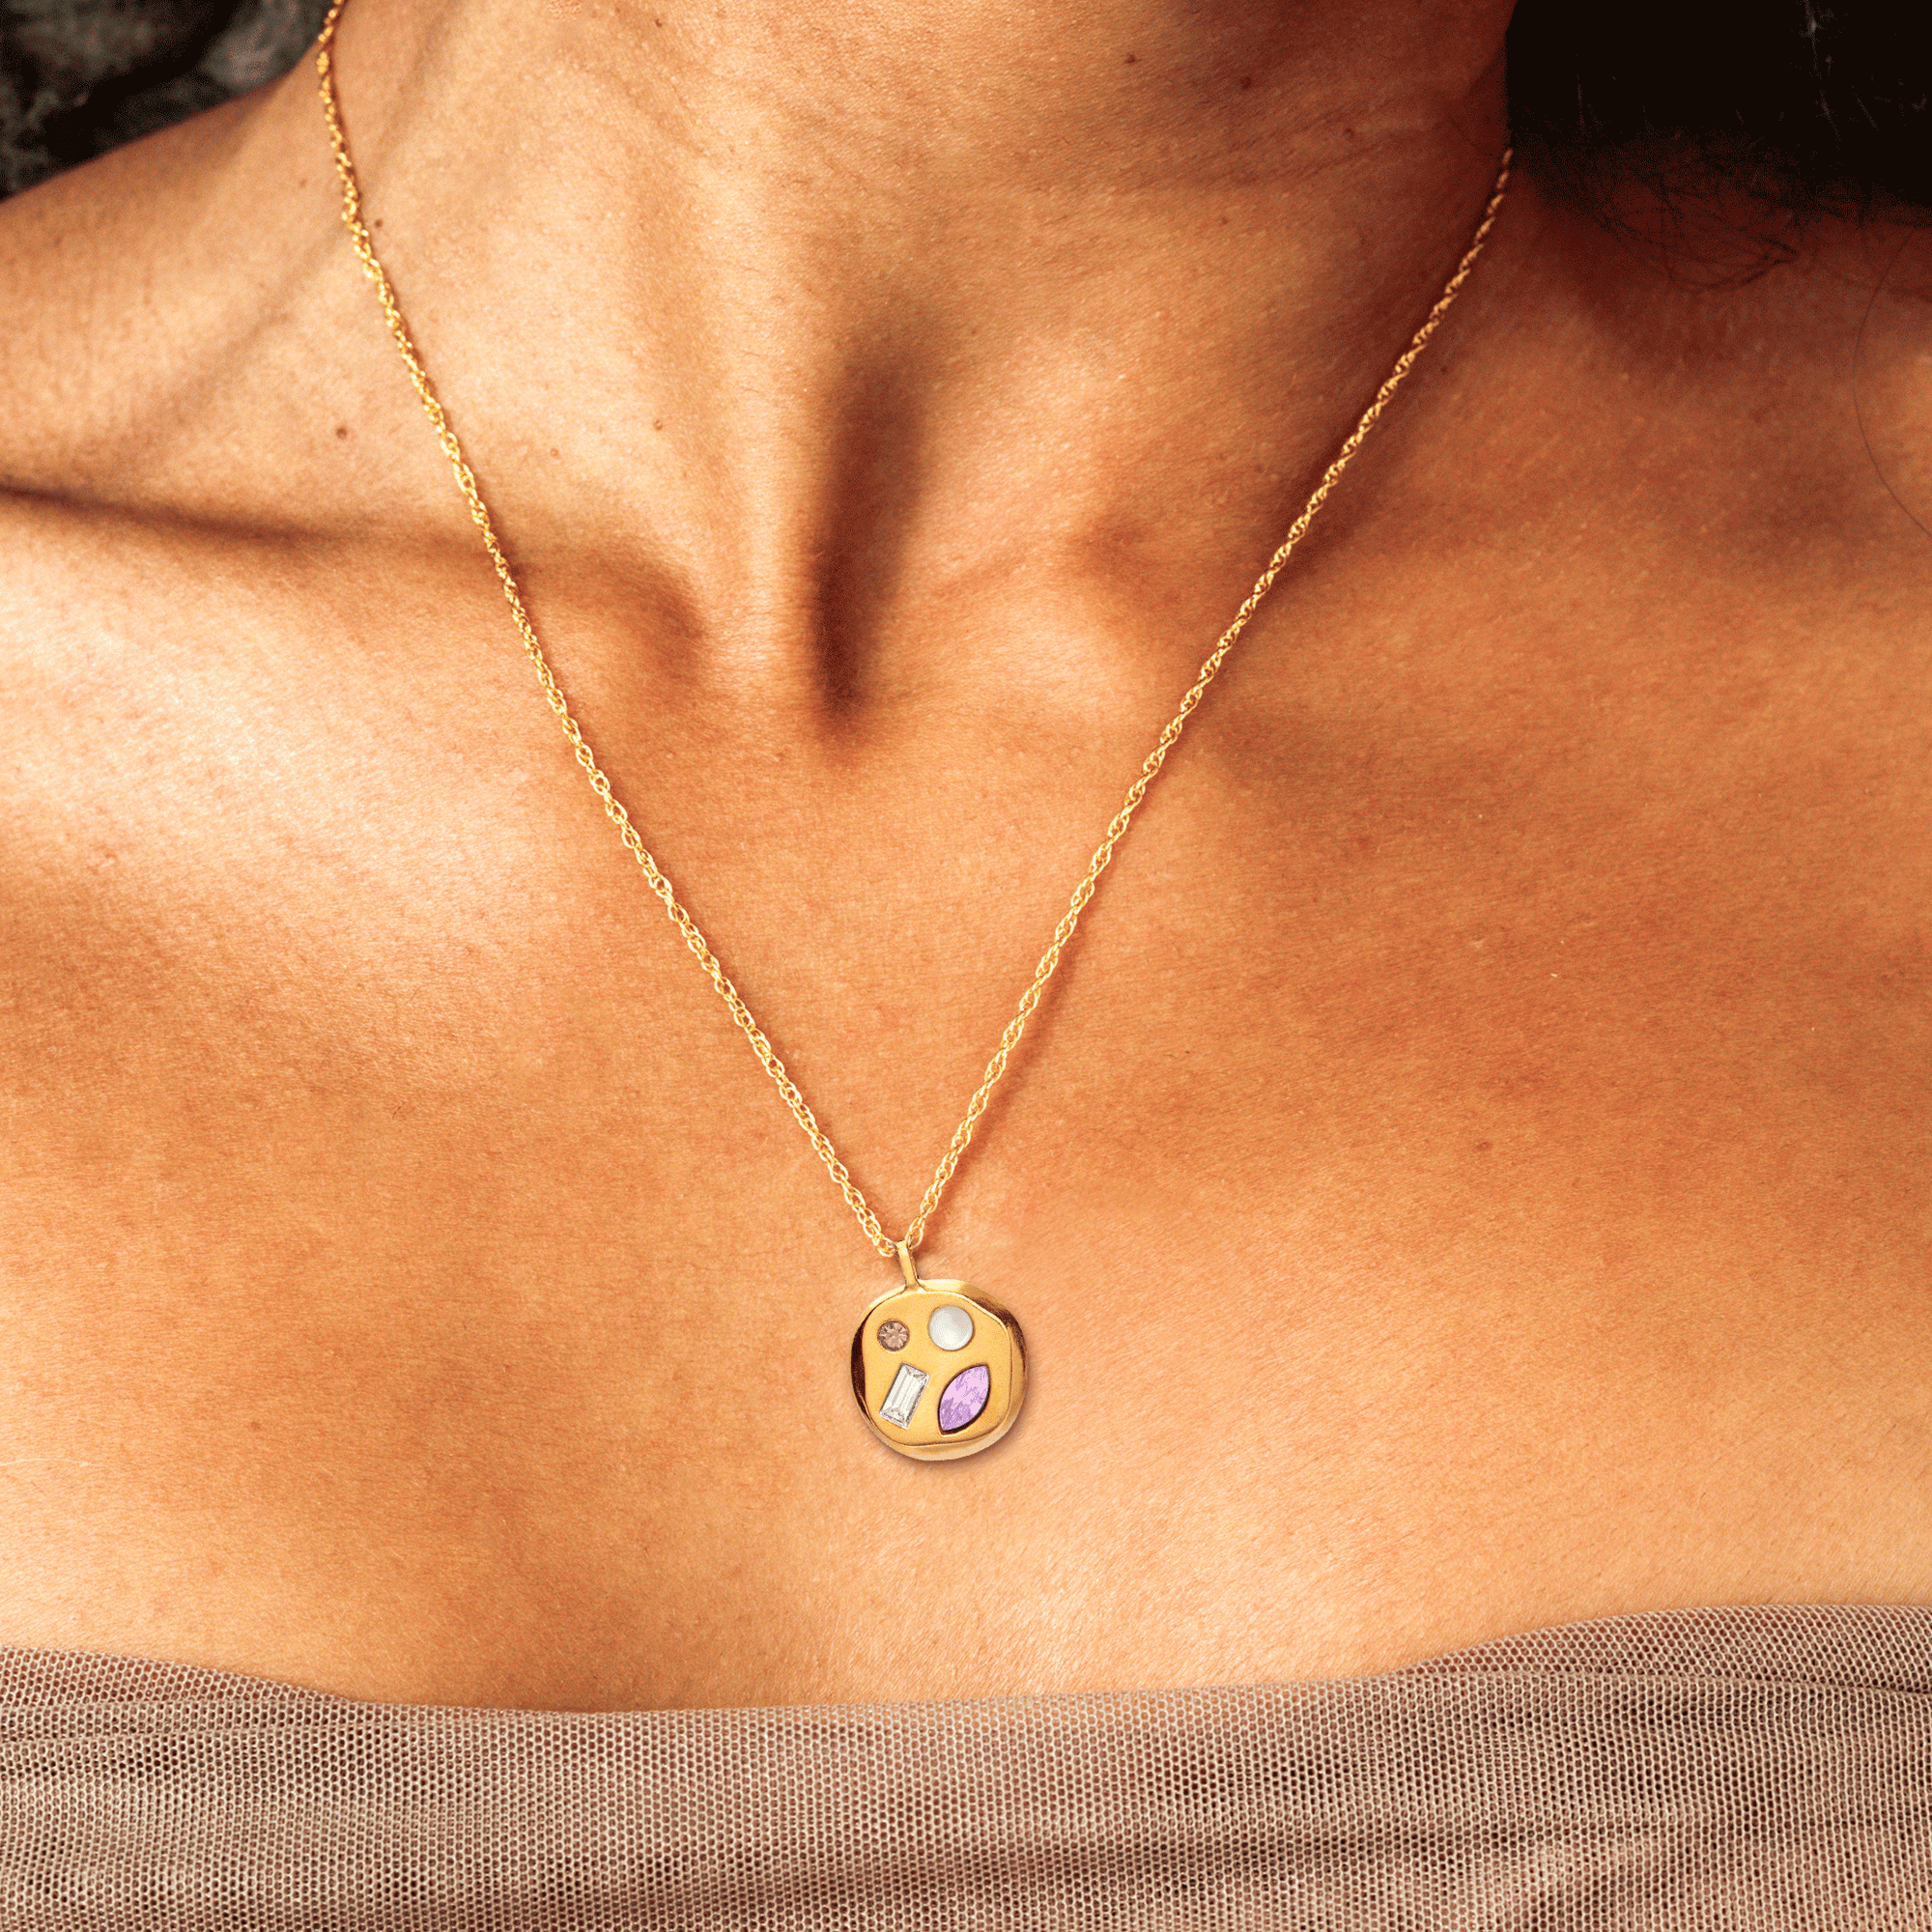 Person wearing The June Seventeenth Pendant